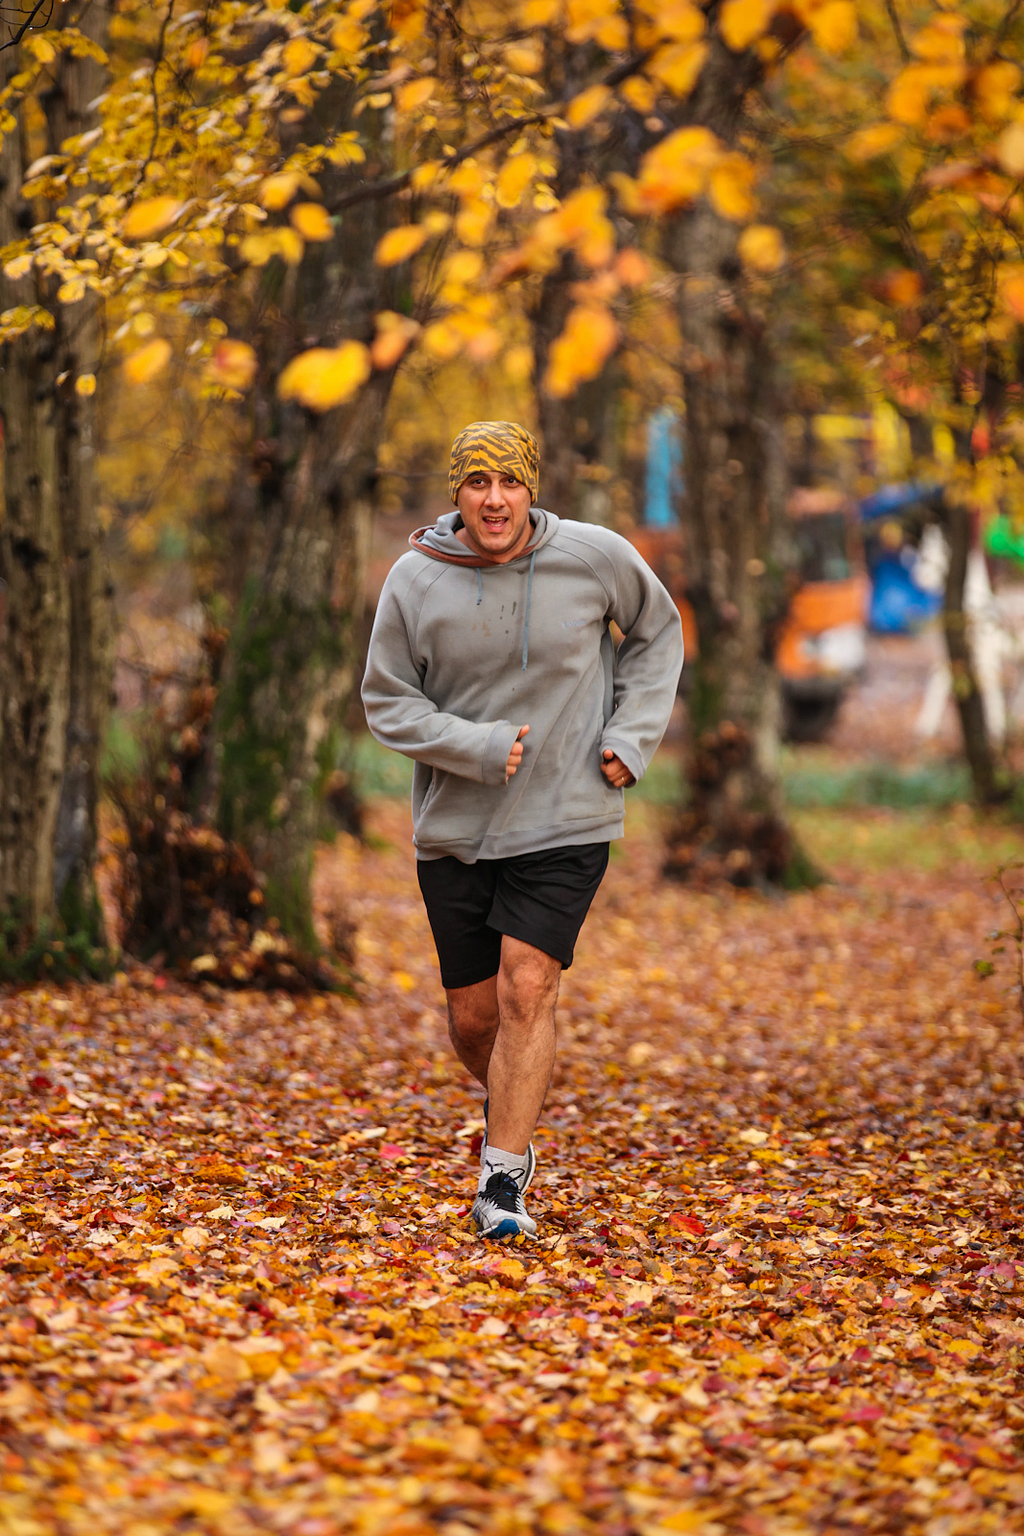 Man running on a path surrounded by trees and fall leaves